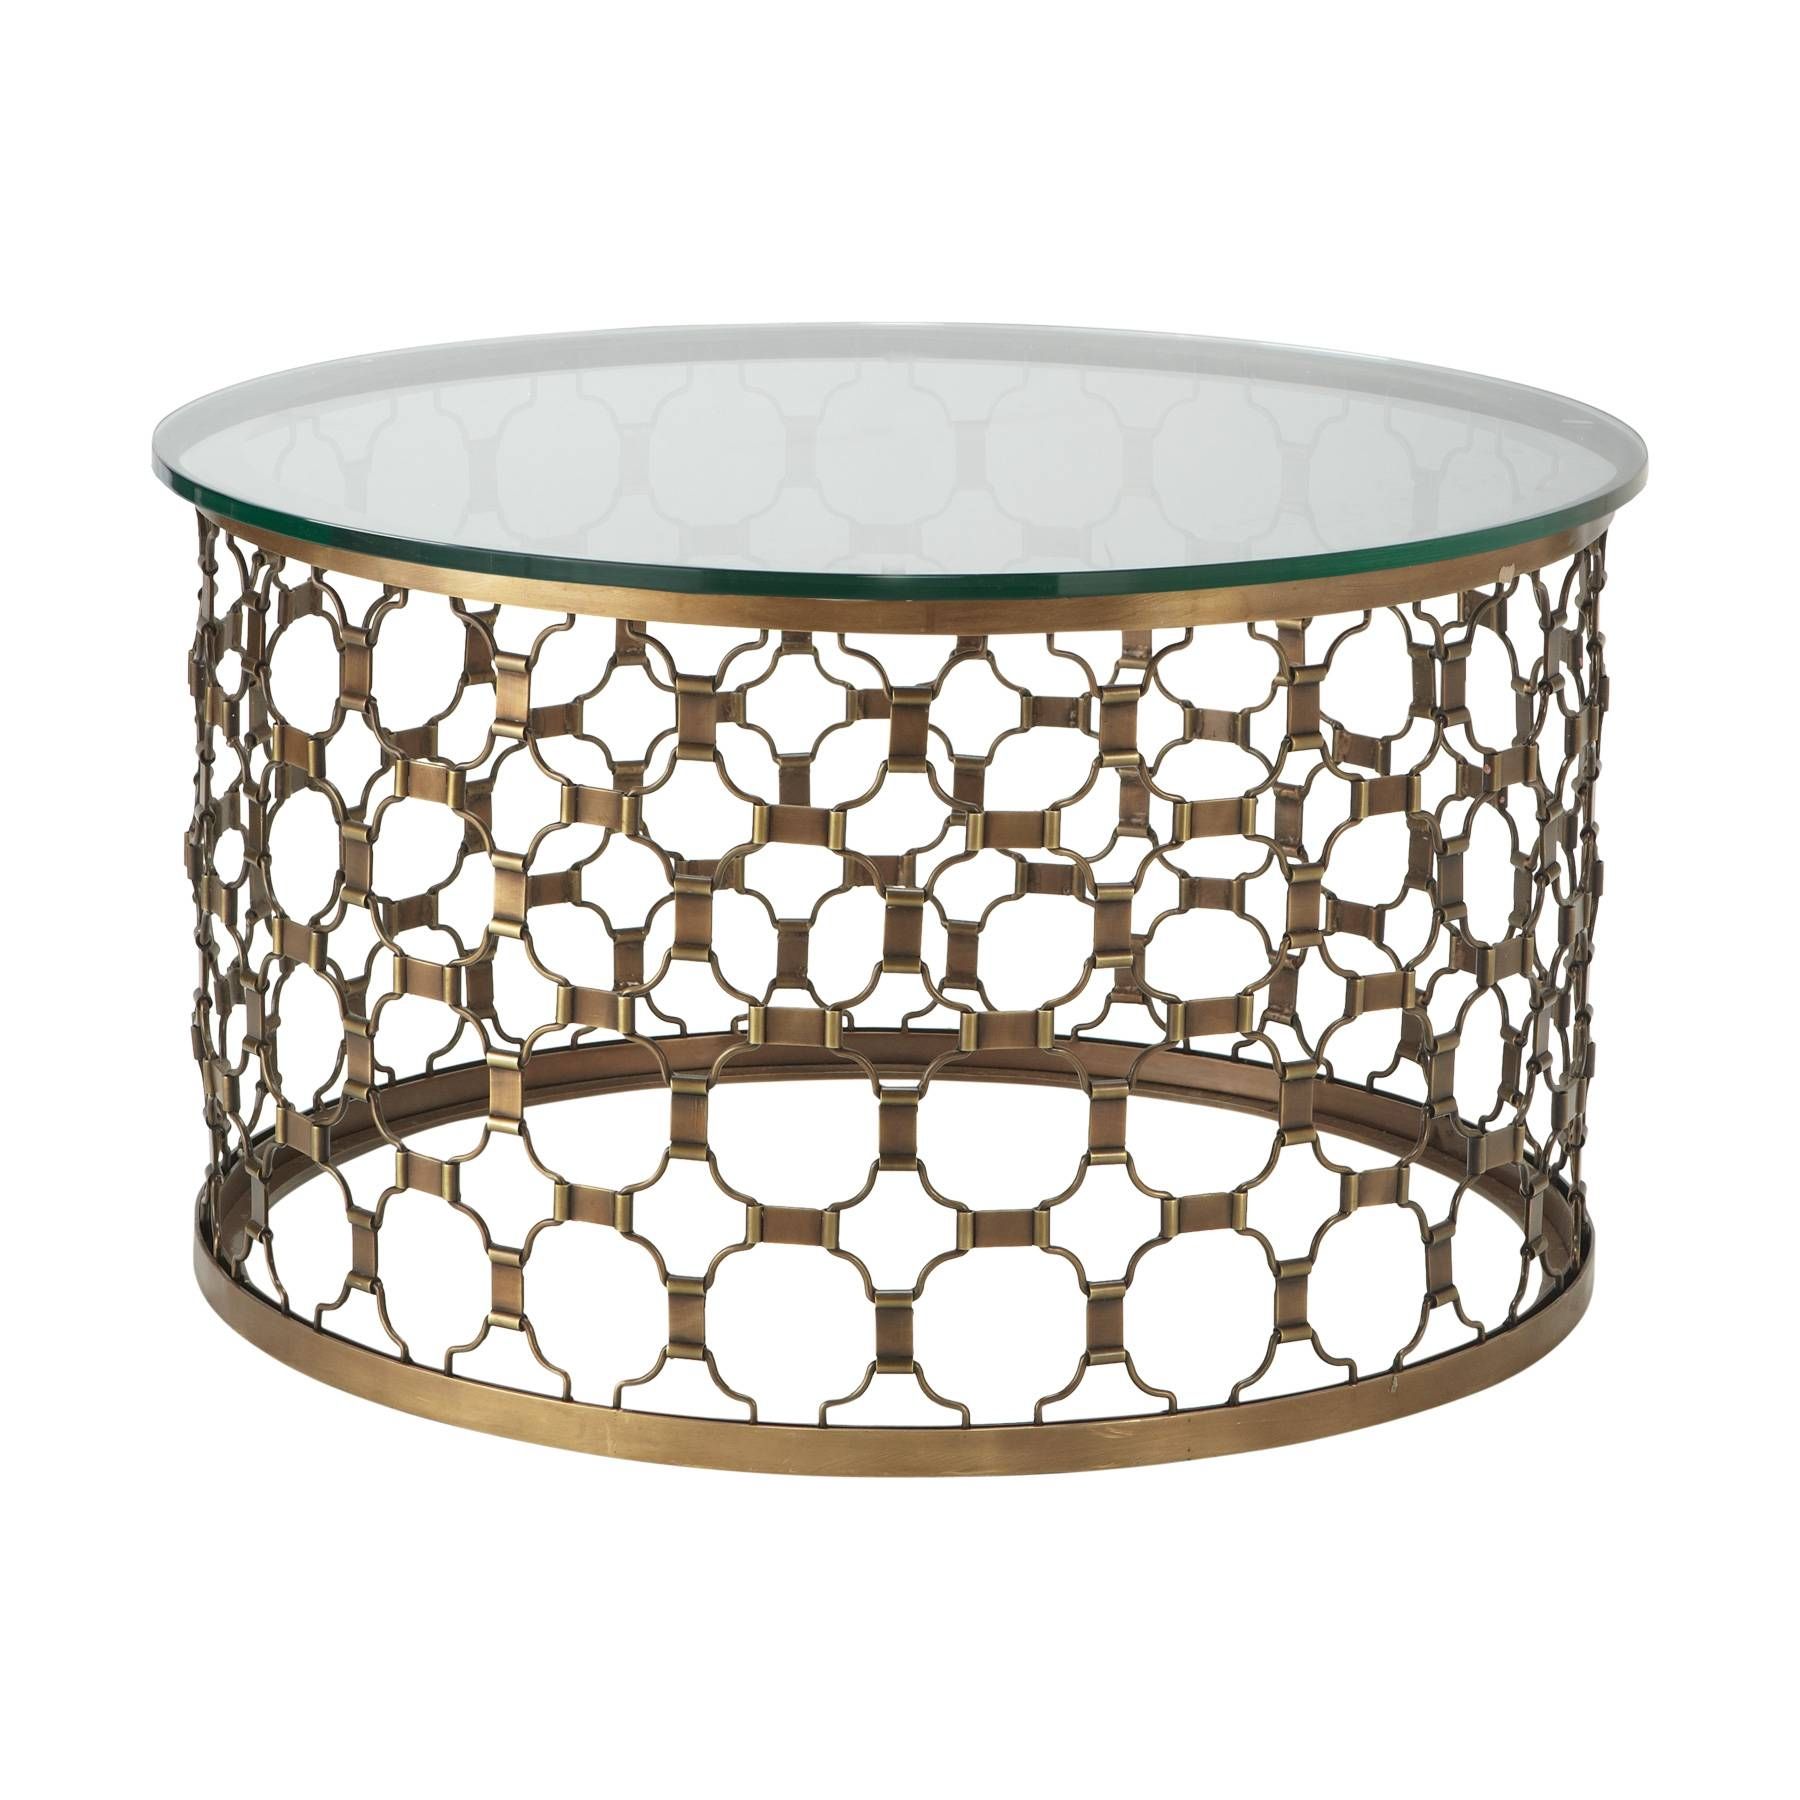 Round Metal Coffee Table Australia | Coffee Tables Decoration Within Small Circle Coffee Tables (View 15 of 30)